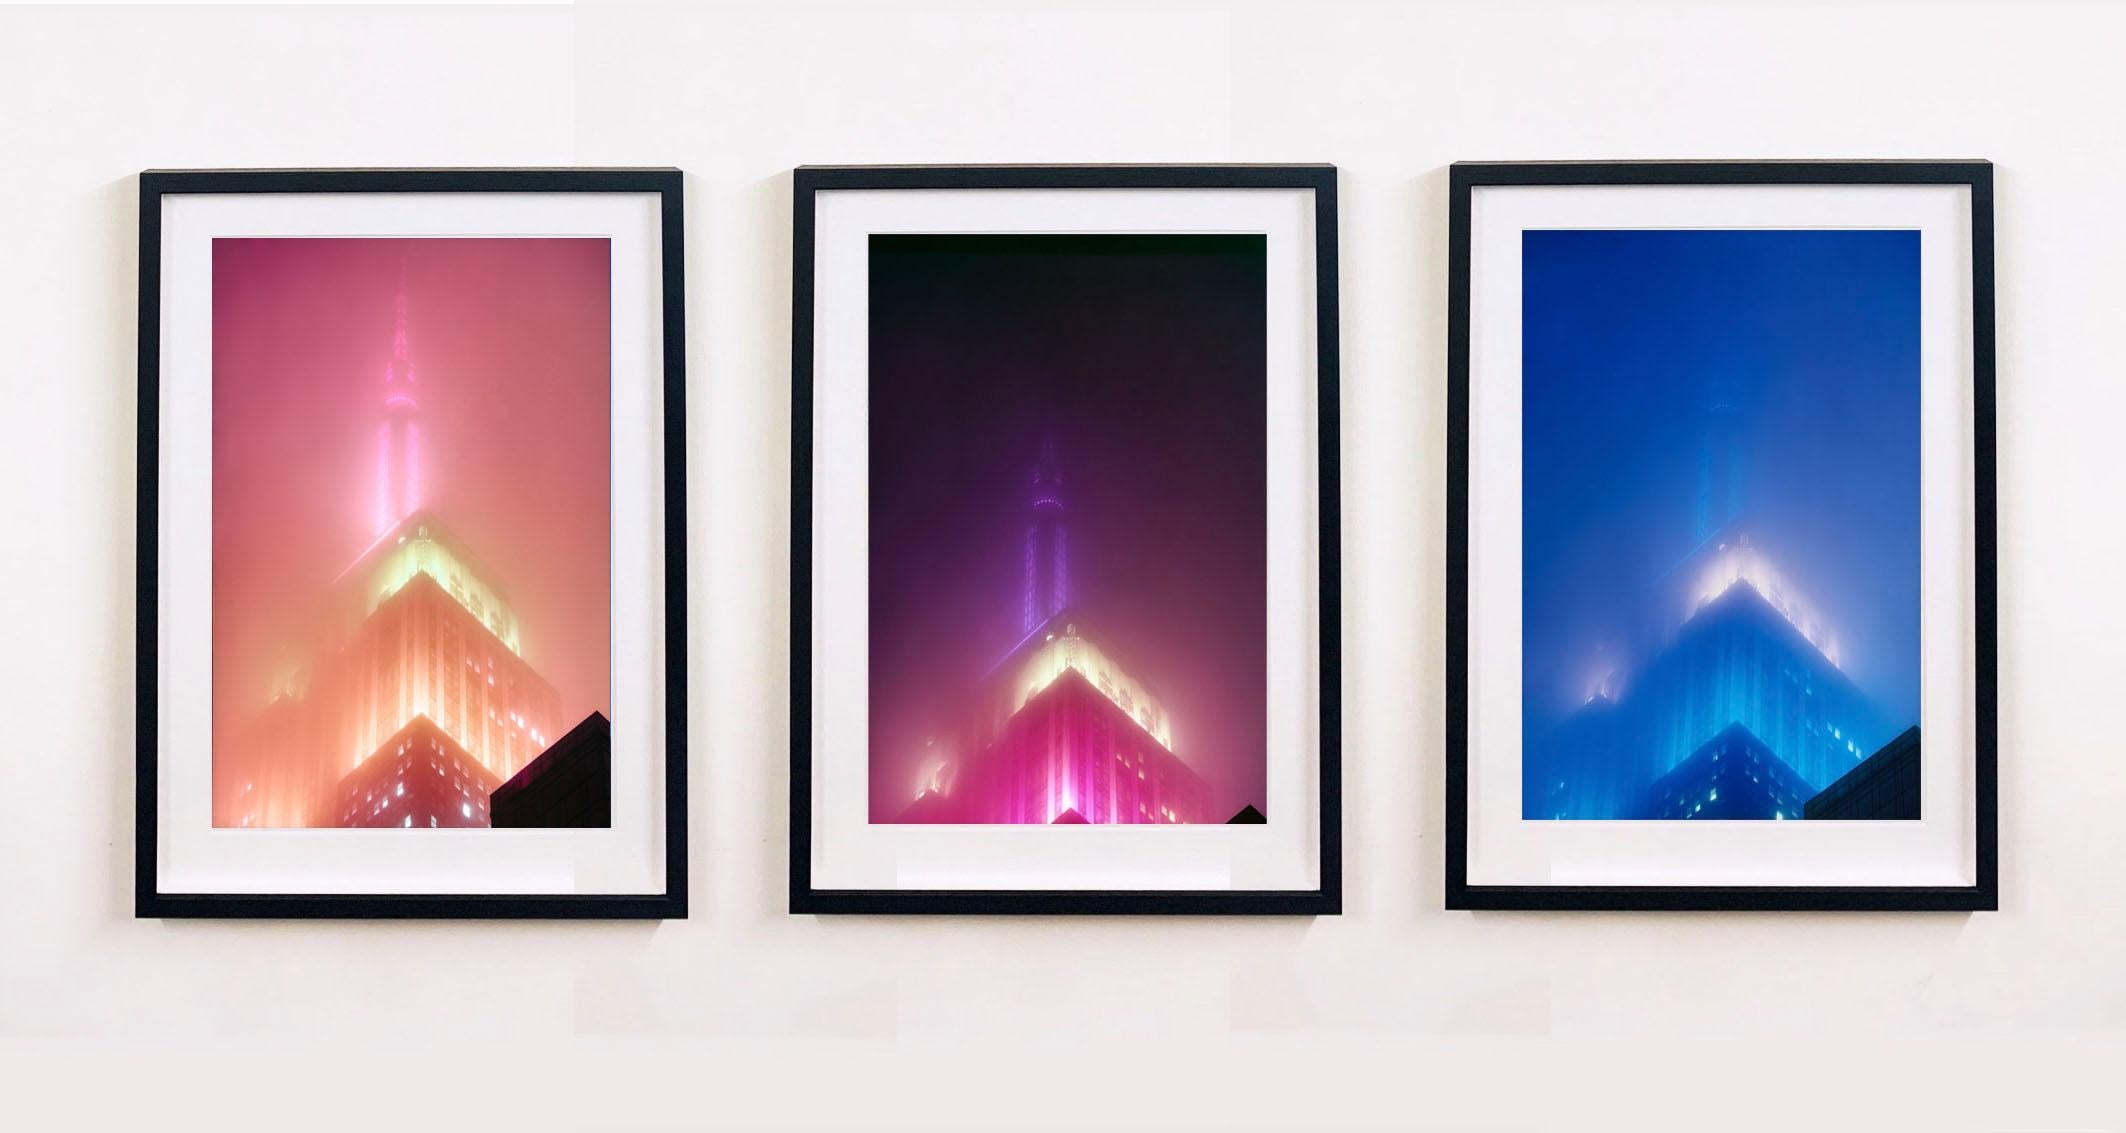 Richard Heeps Color Photograph - NOMAD, New York, Triptych - American architectural color photography